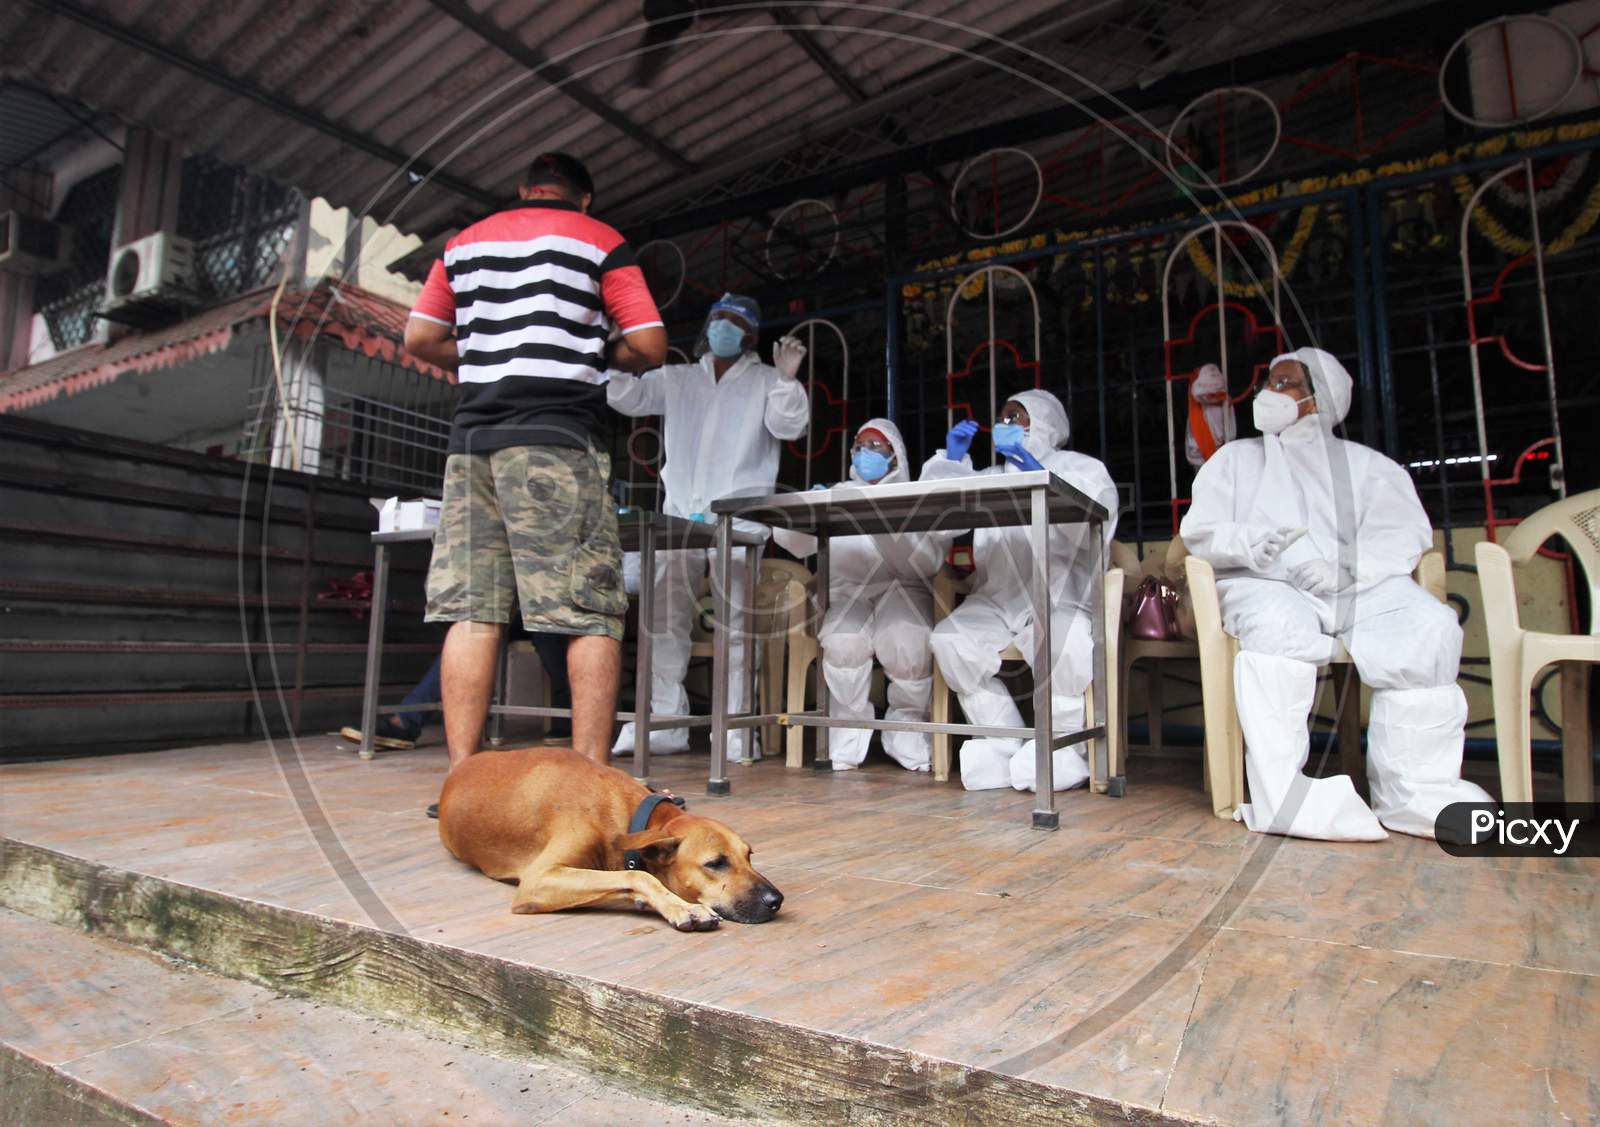 Healthcare workers wearing personal protective equipment(PPE) conduct a check up campaign for the coronavirus disease (COVID-19) , at the entrance of a temple, in Mumbai, India on August 15, 2020.